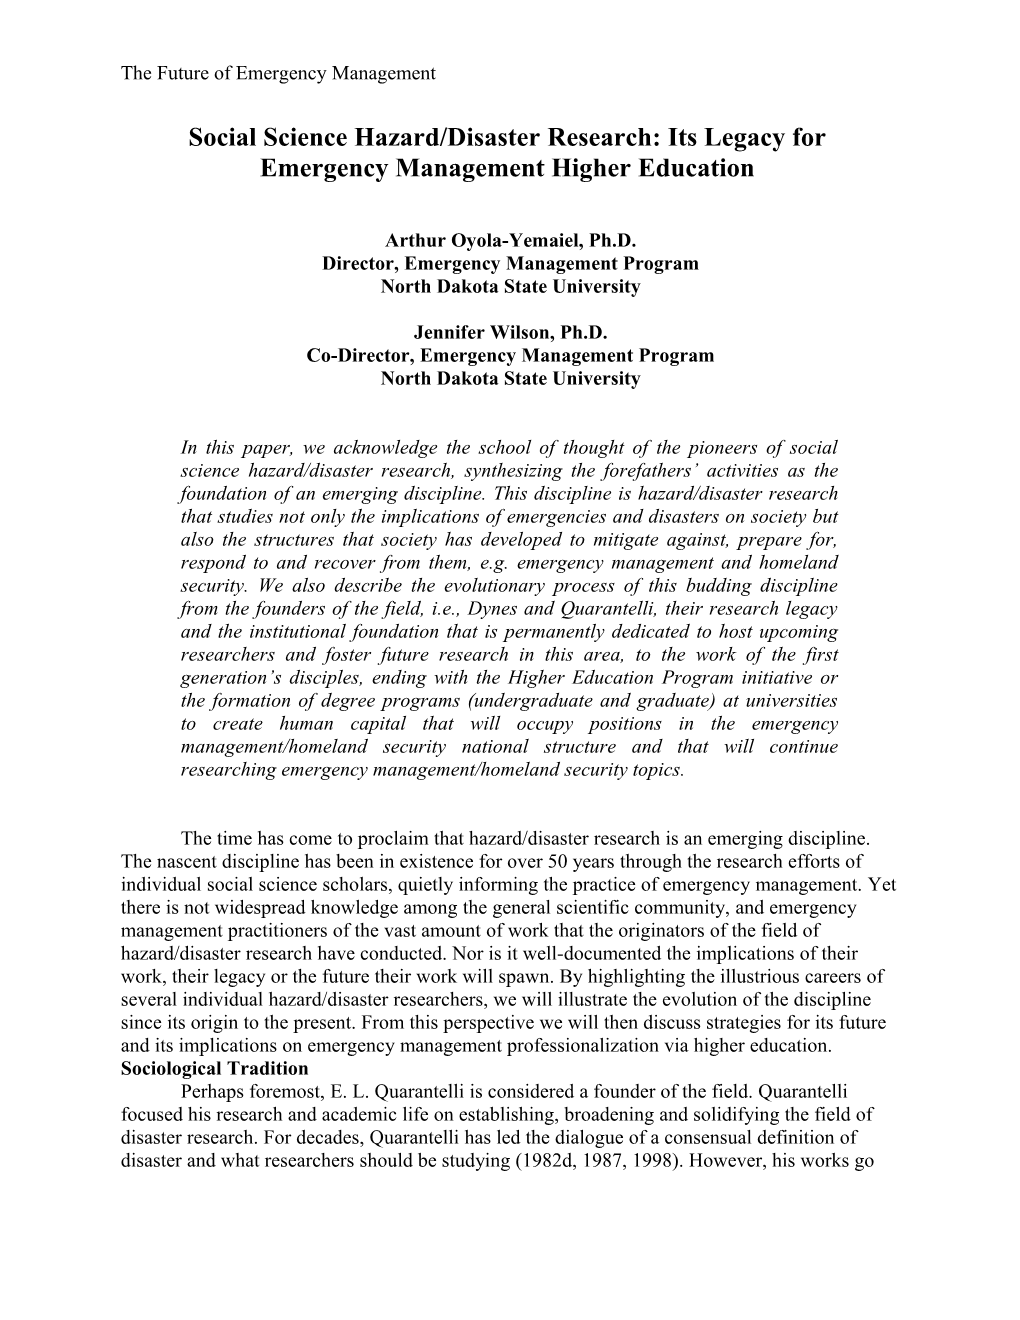 "Graduate Programs In Emergency Management: Their Contributions To Disaster Research"